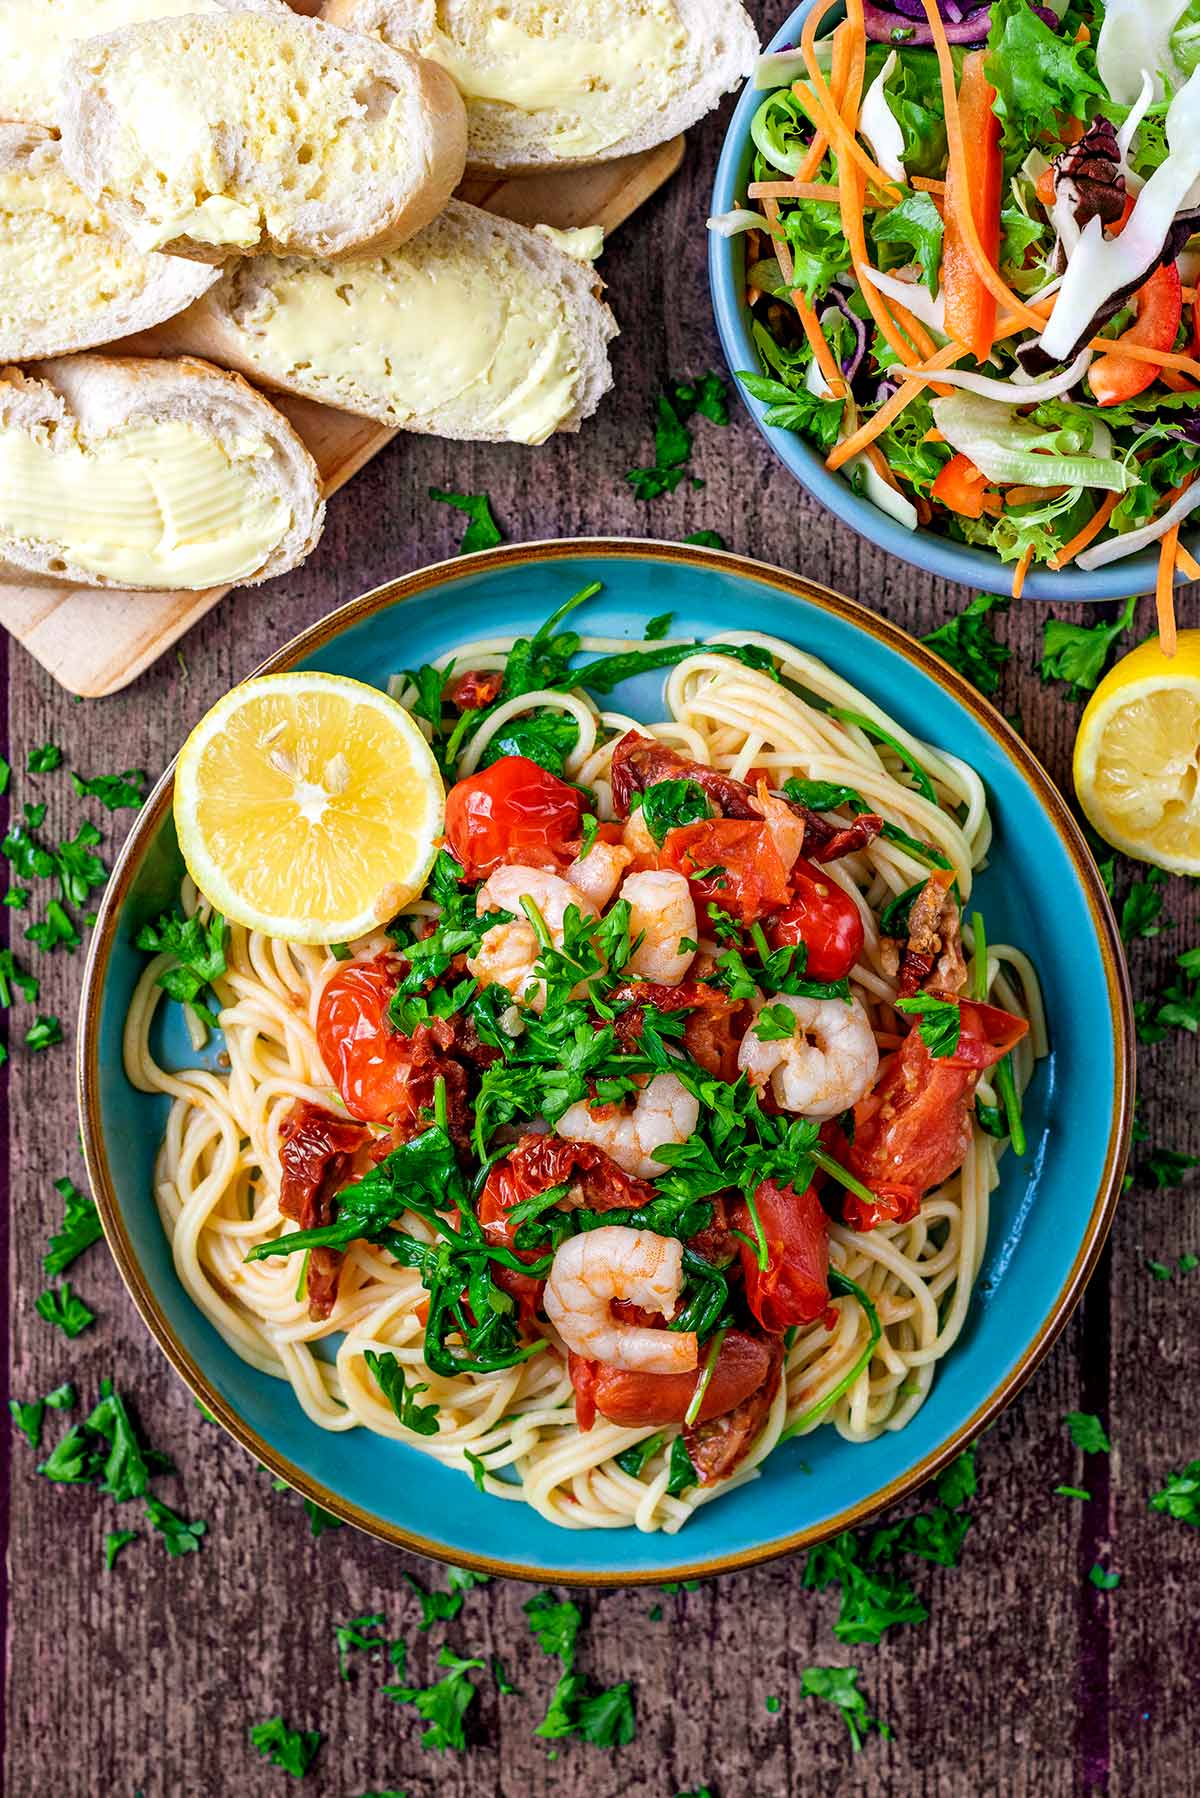 A plate of tomato and prawn spaghetti next to a board of bead and a bowl of salad.